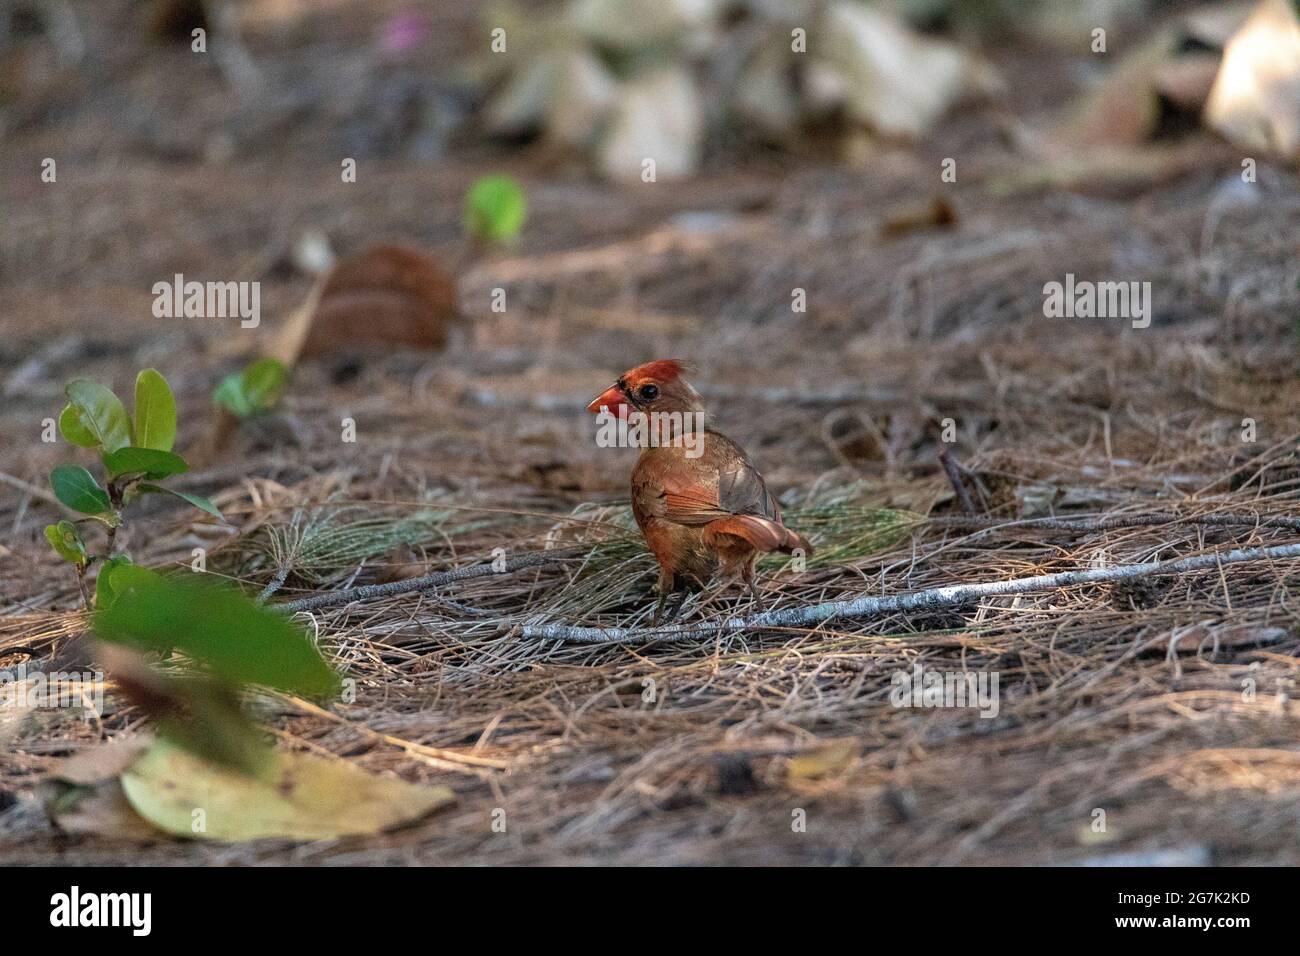 Foraging juvenile male red cardinal Cardinalis cardinalis bird as it looks for food on the ground in Naples, Florida. Stock Photo